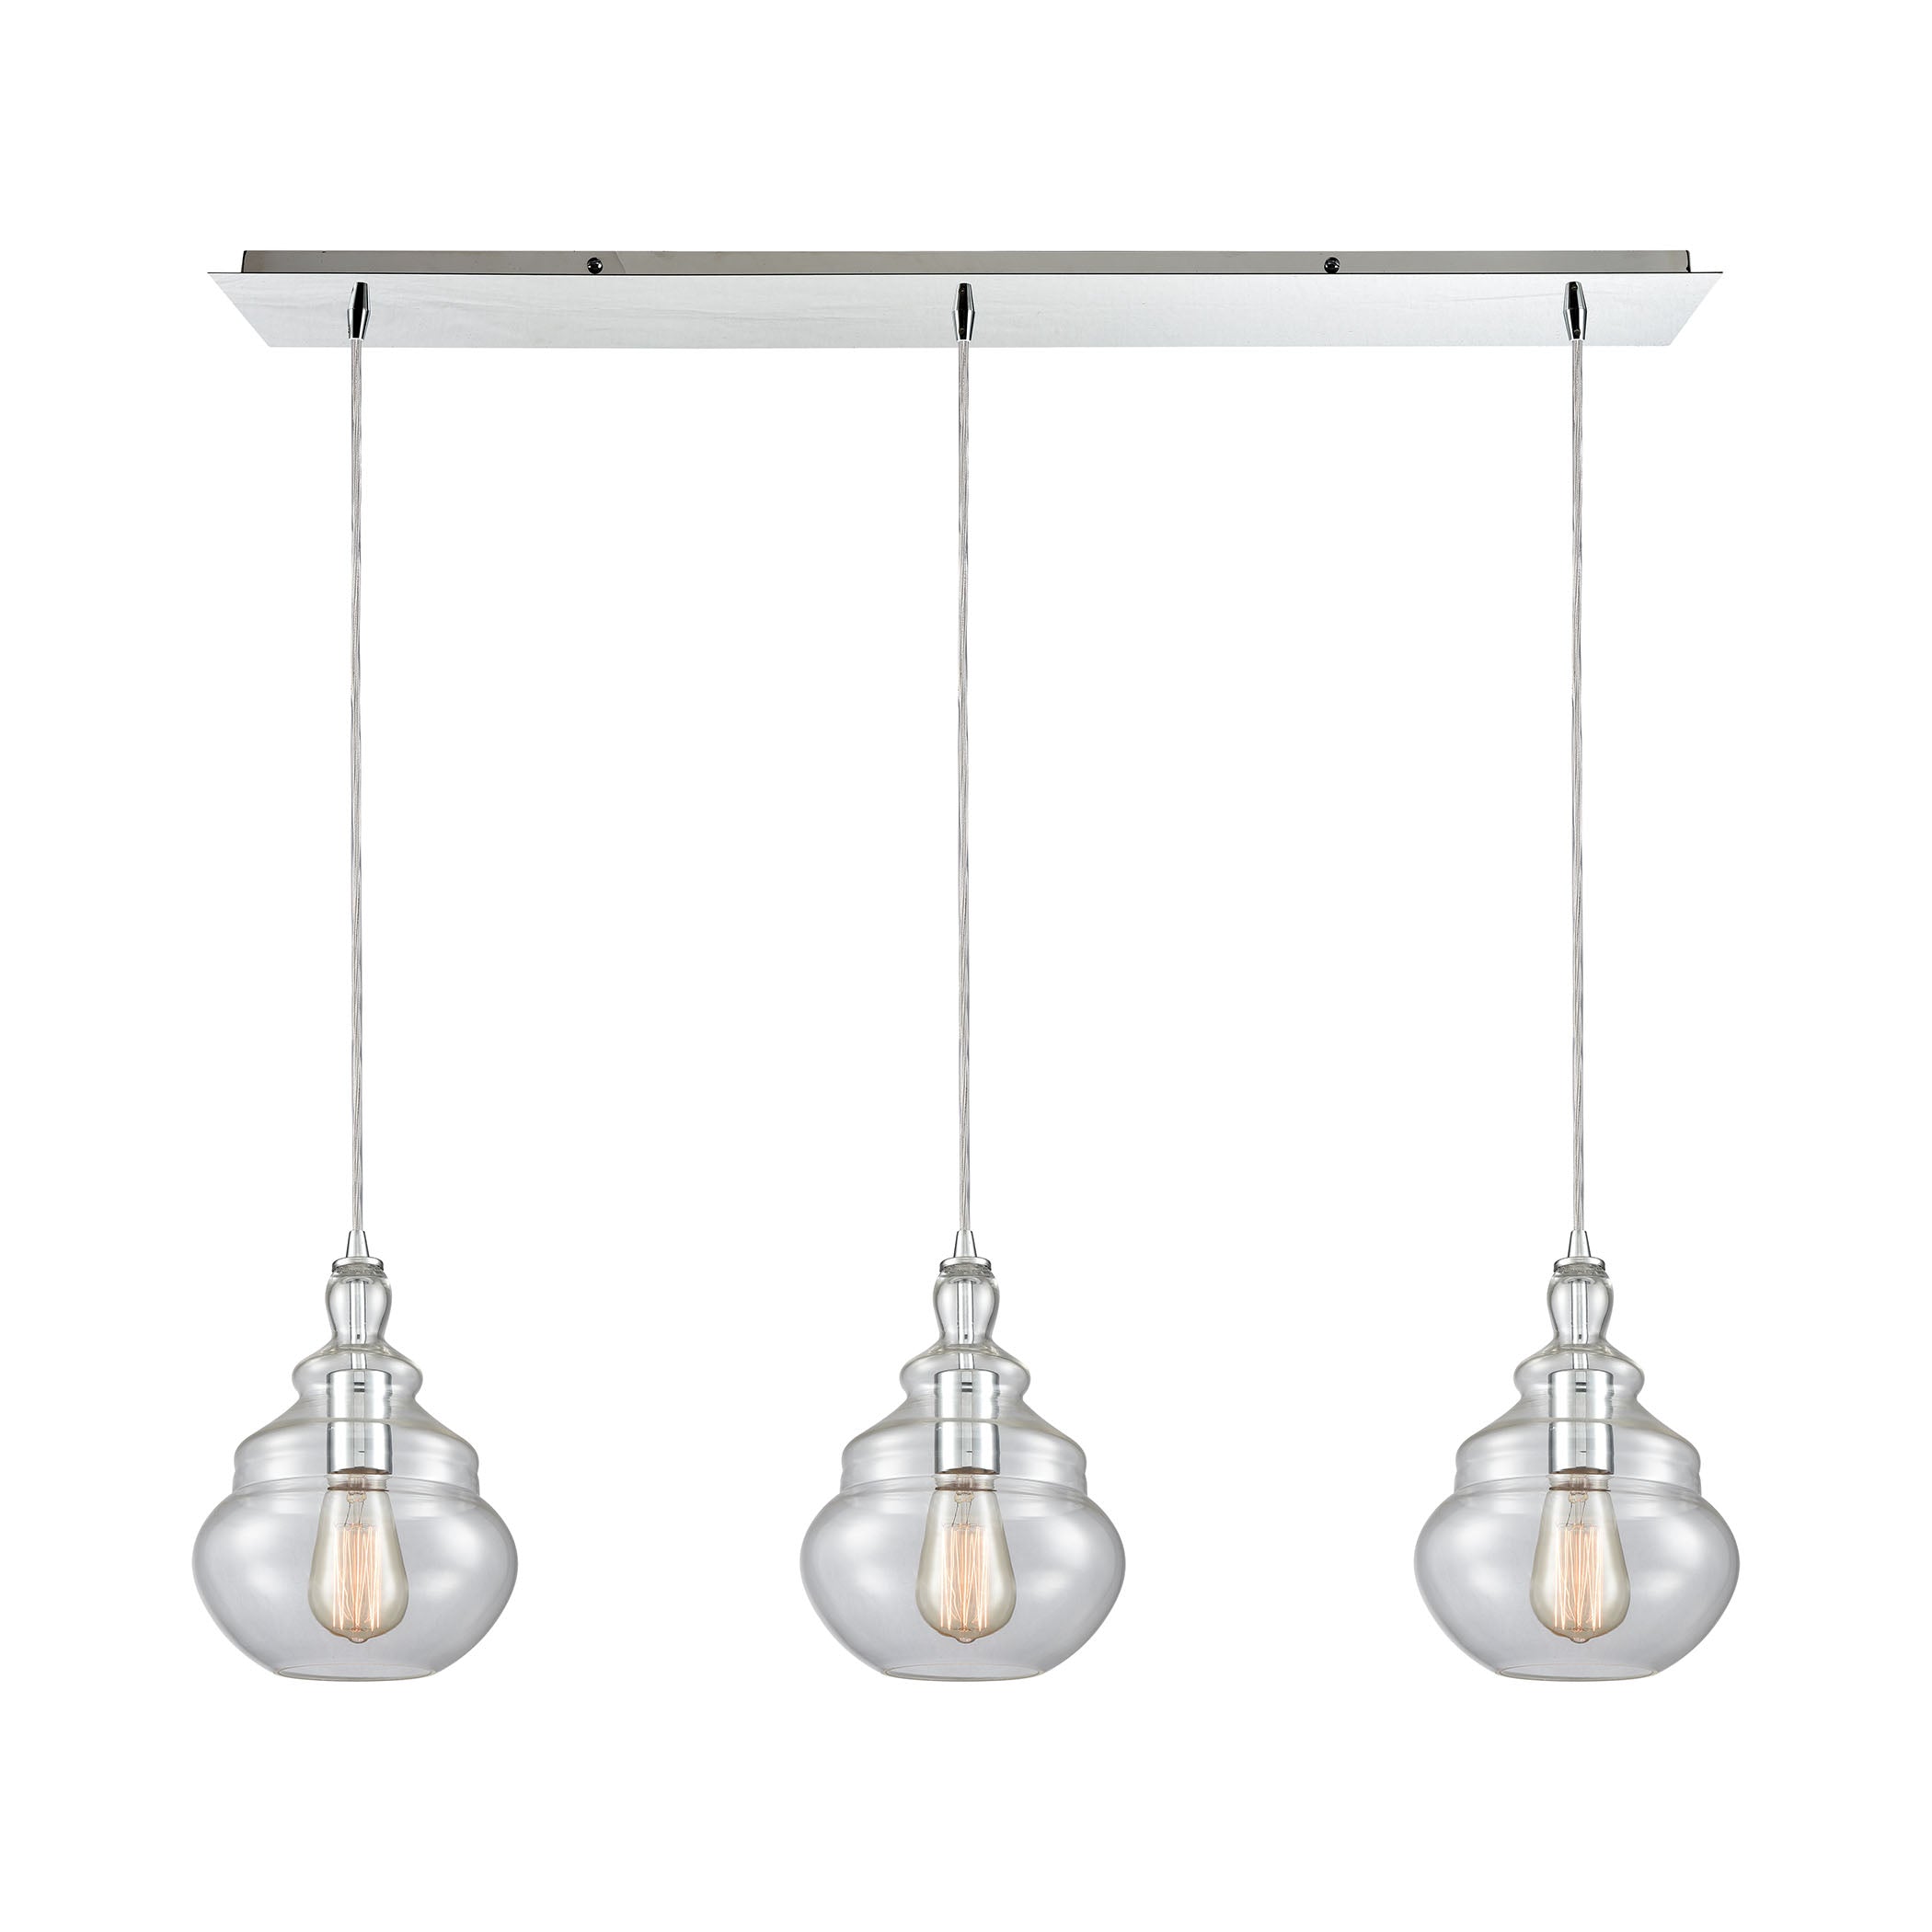 ELK Lighting 10562/3LP Tabor 3-Light Linear Mini Pendant Fixture in Polished Chrome with Clear Glass